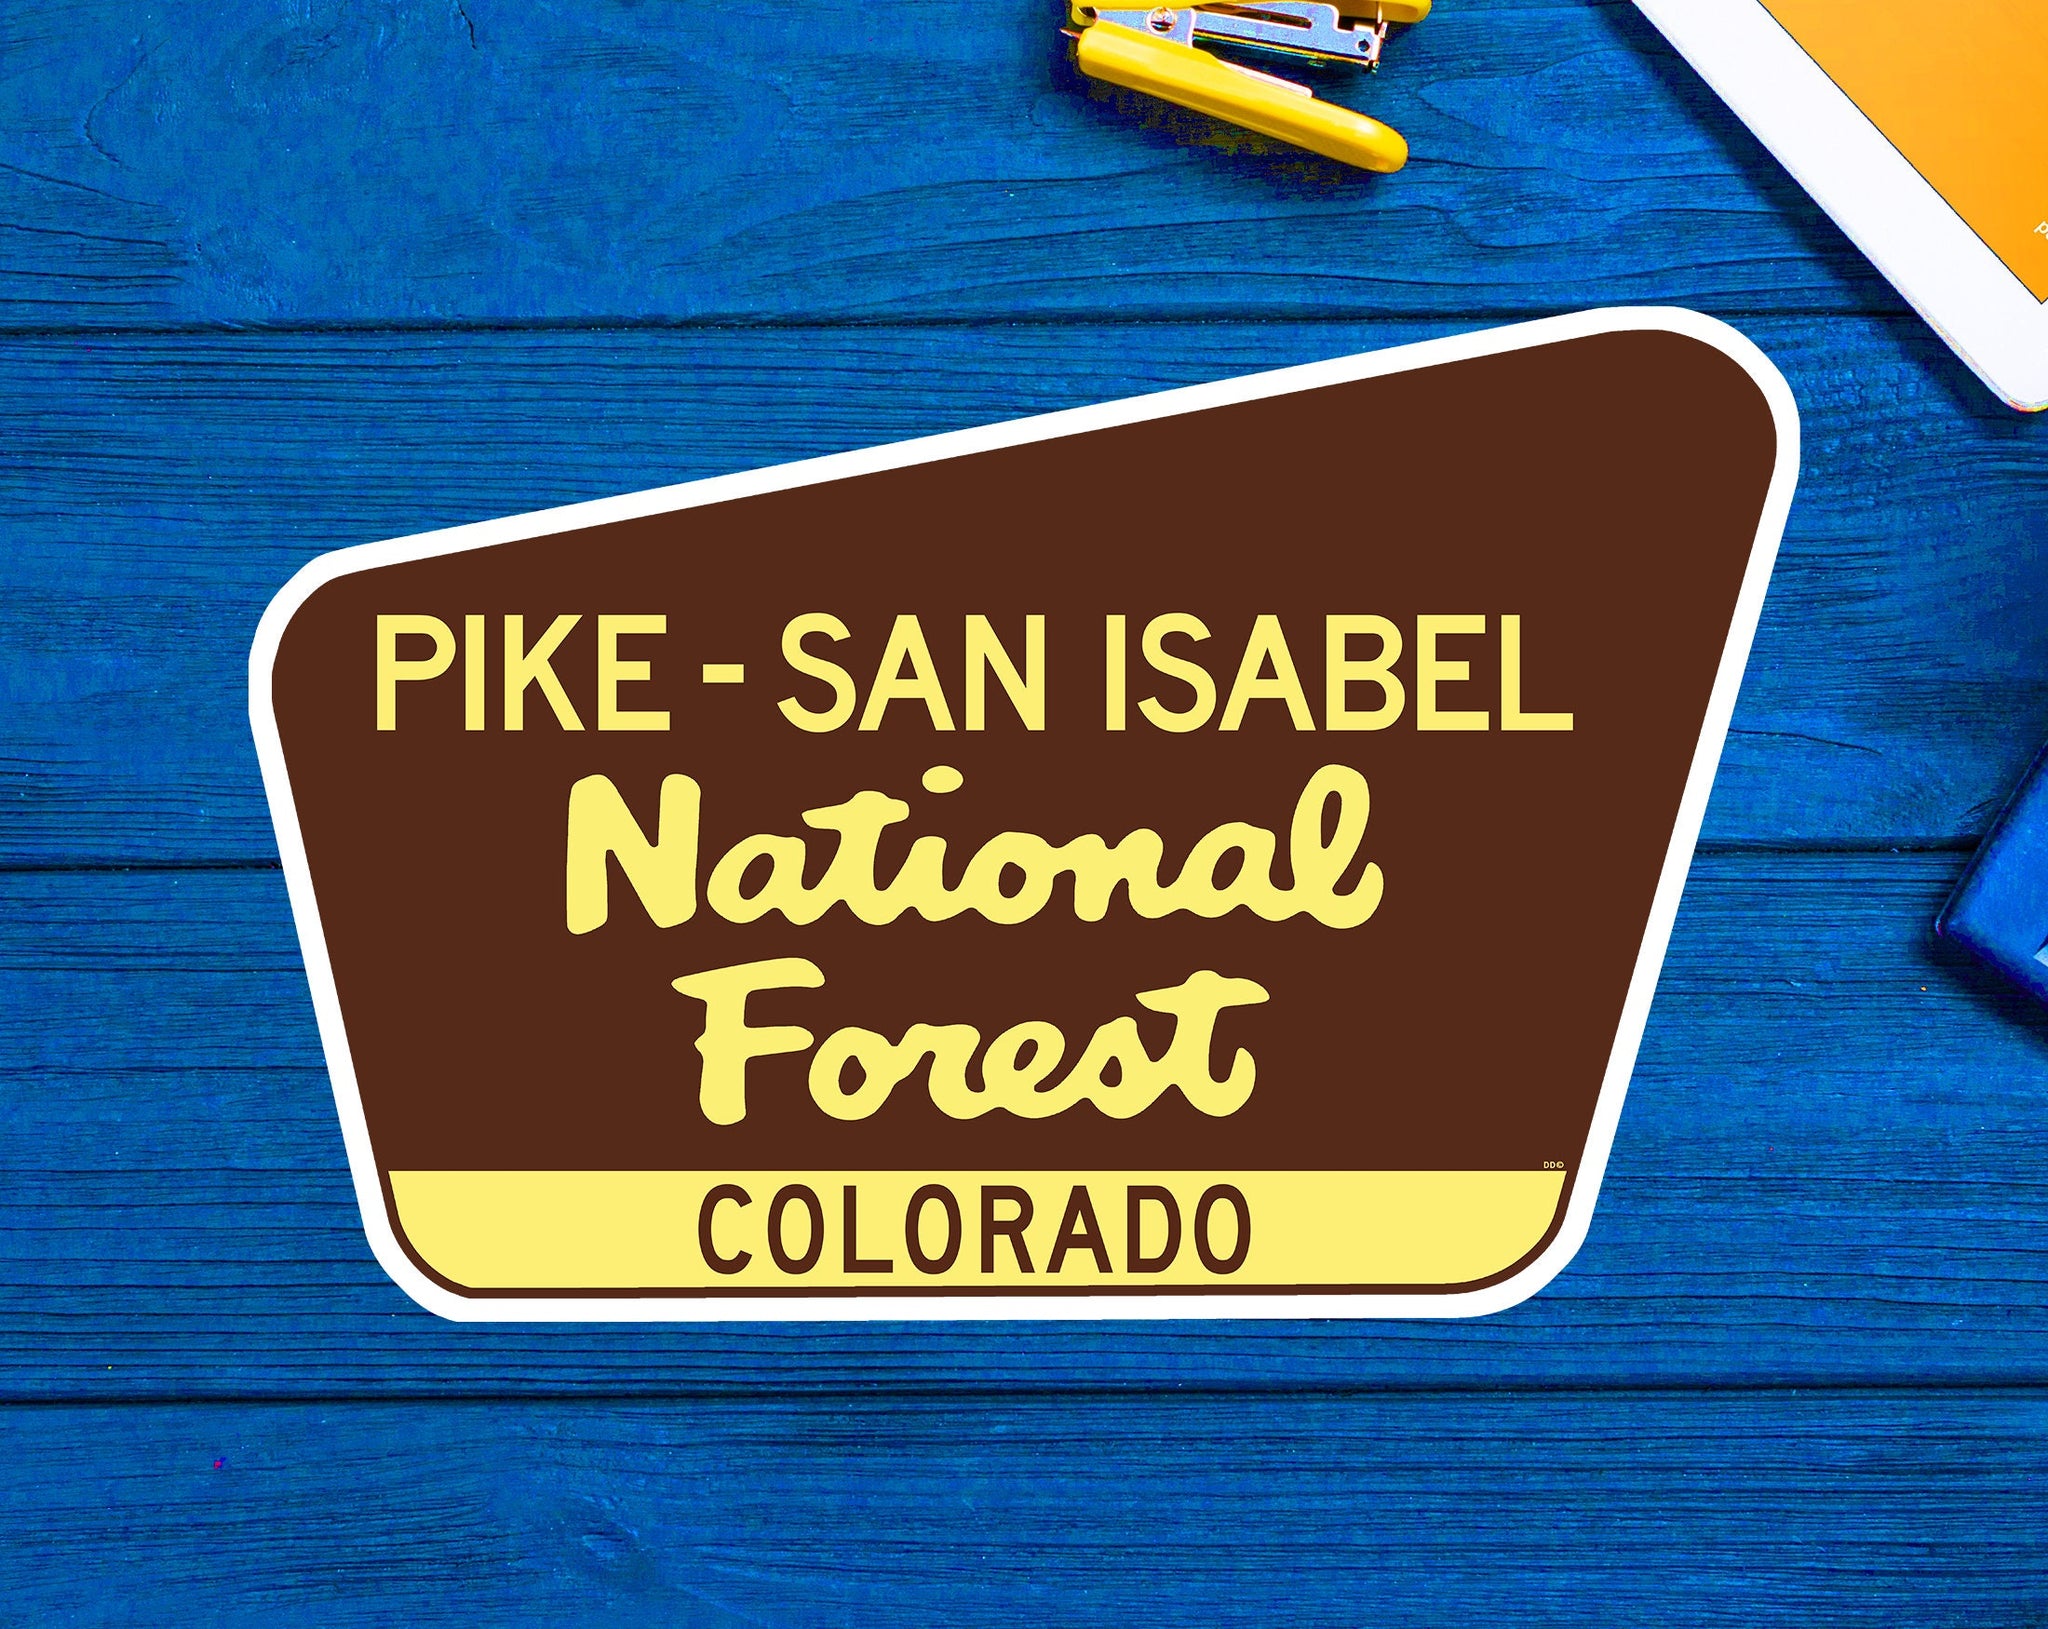 Pike - San Isabel National Forest Decal Sticker 3.75" x 2.5" Colorado Park Vinyl